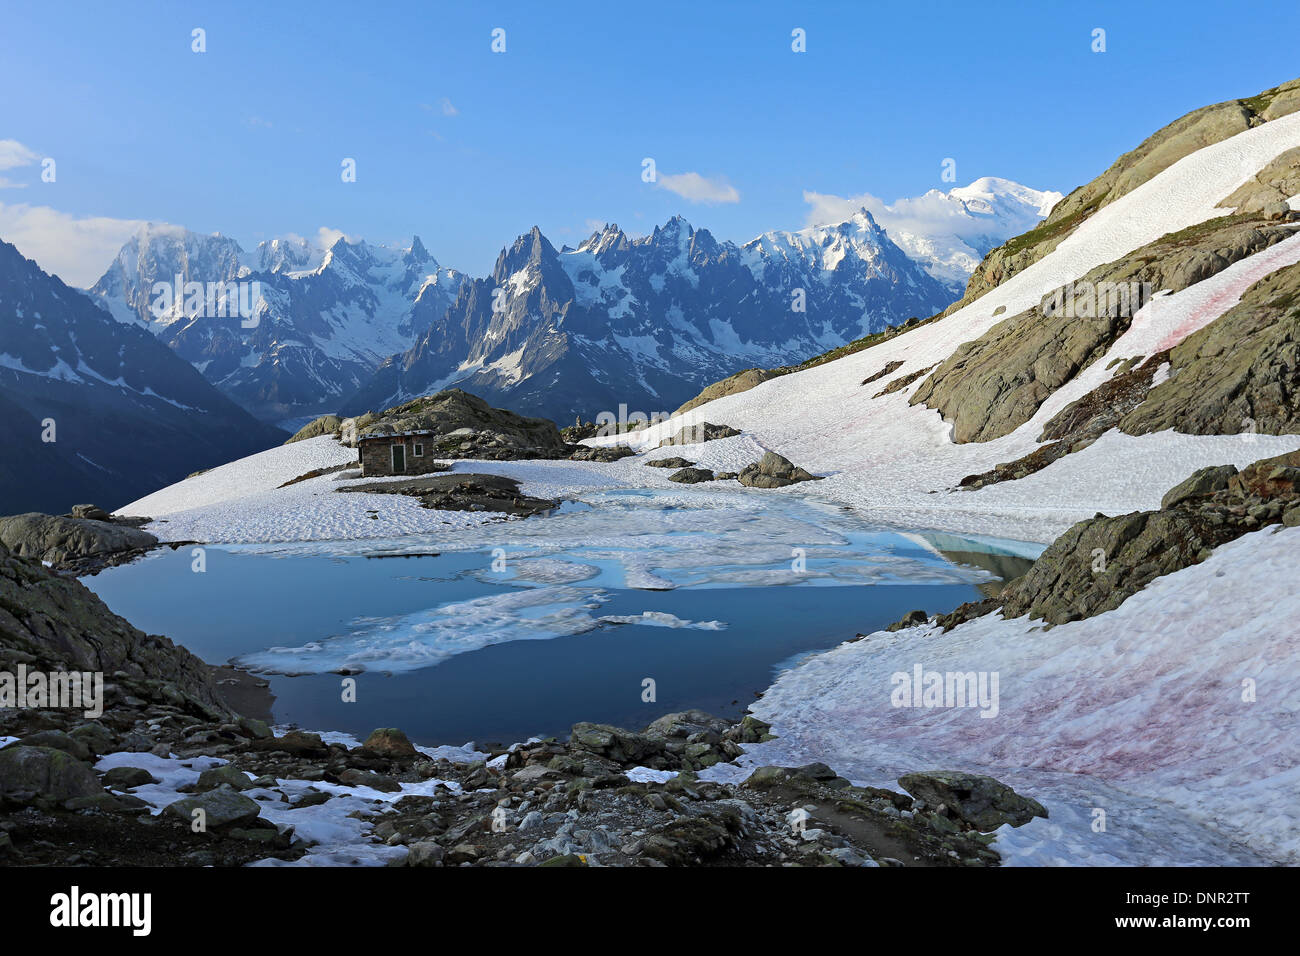 Lac Blanc and peaks of the Mont Blanc mountain group. Alpine landscape with lake and snow. Aiguilles Rouges massif, French Alps. Europe. Stock Photo